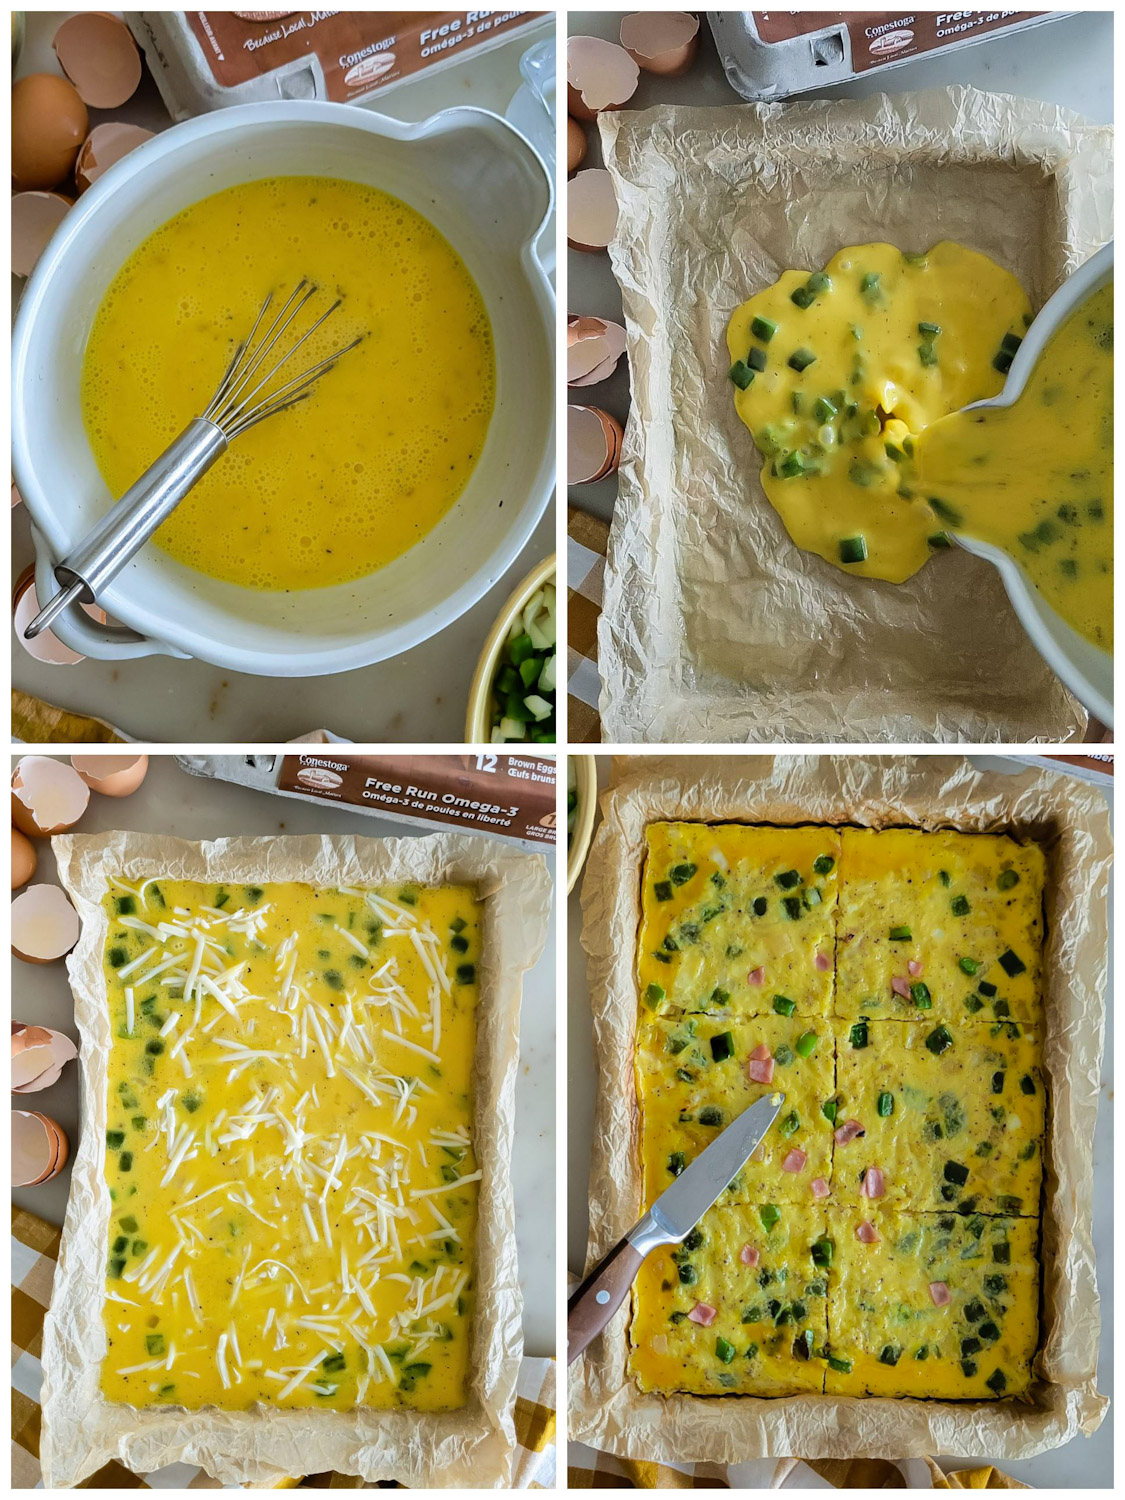 A collage showing the preparation for Toasted Western Sheet Pan Baked Eggs. The Mixing bowl is in the first image. The egg batter is being poured into the parchment lined baking sheet in the second image. The third image shows grated cheese strewn on top. The final image shows the baked eggs, with cubed ham and diced green peppers dotting the surface. A knife that has sliced the baked eggs into 6 squares sits on on the edge of the pan.